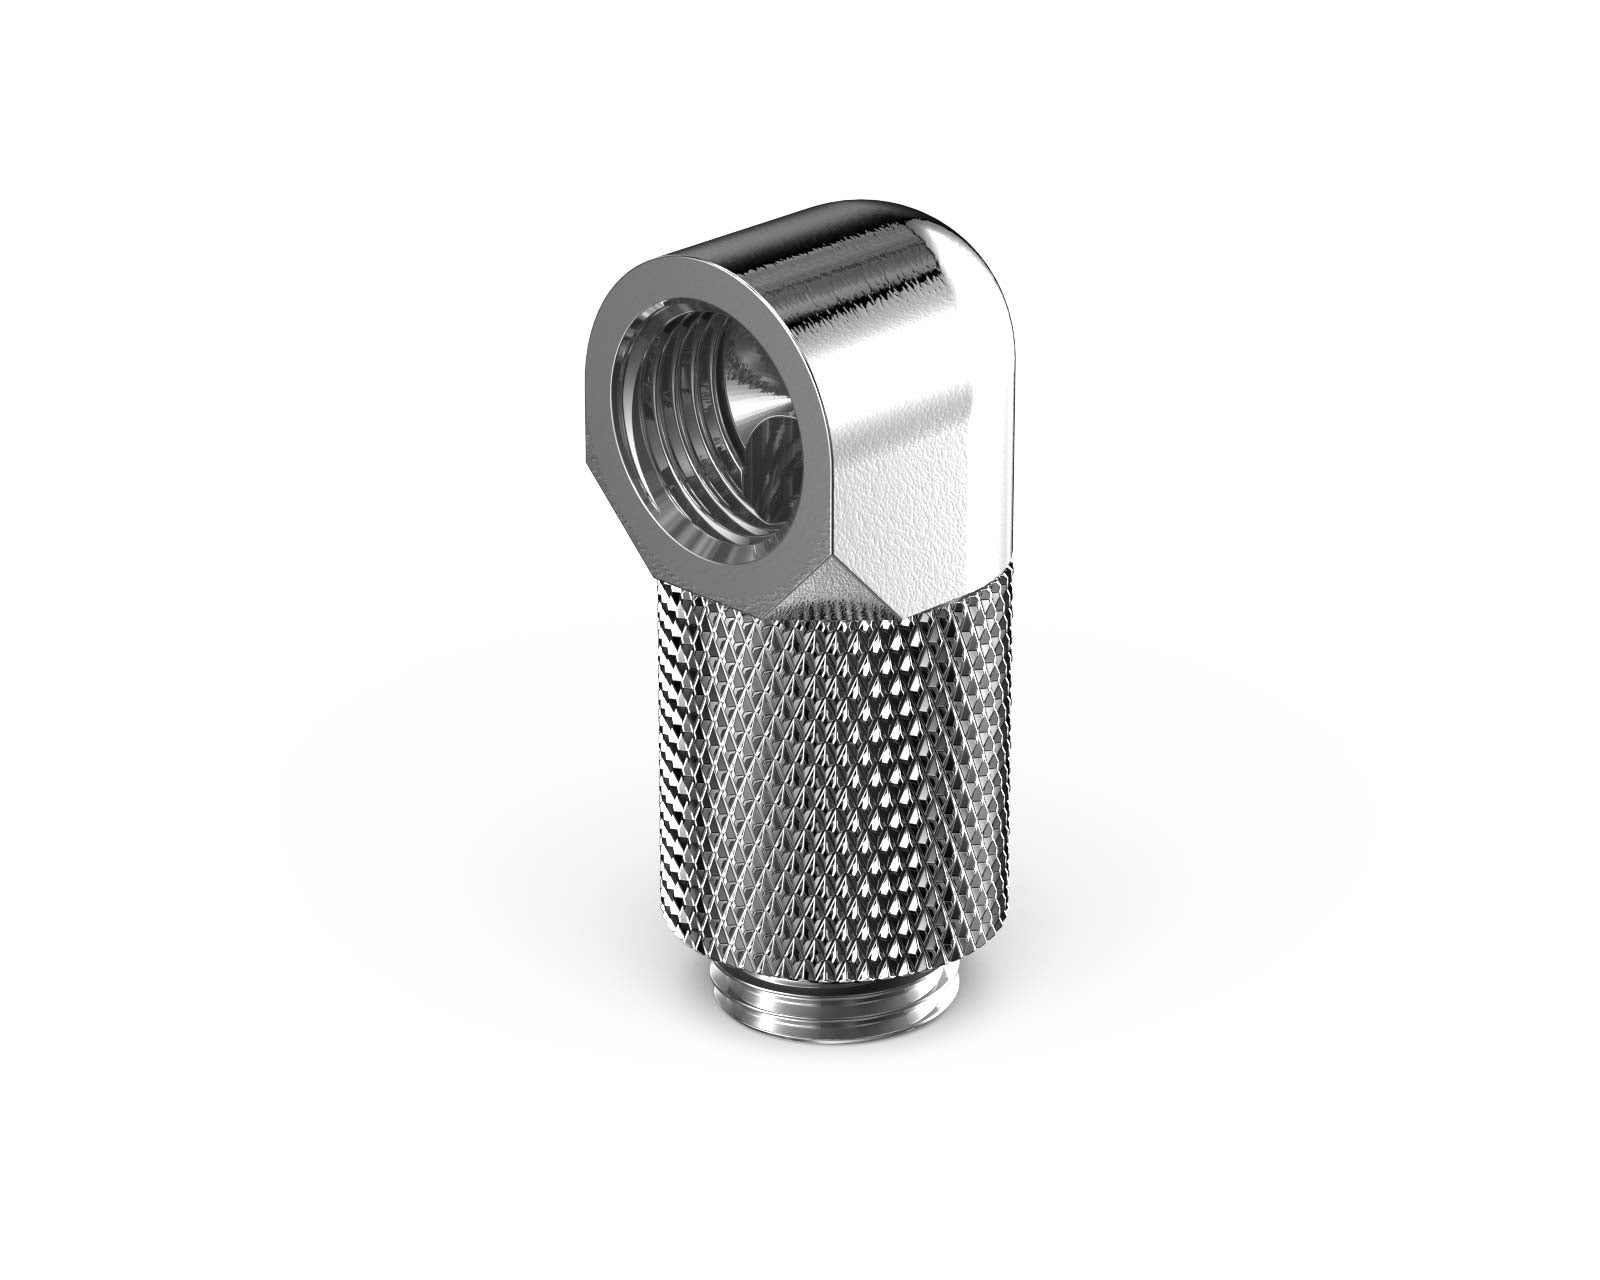 PrimoChill Male to Female G 1/4in. 90 Degree SX Rotary 20mm Extension Elbow Fitting - PrimoChill - KEEPING IT COOL Silver Nickel